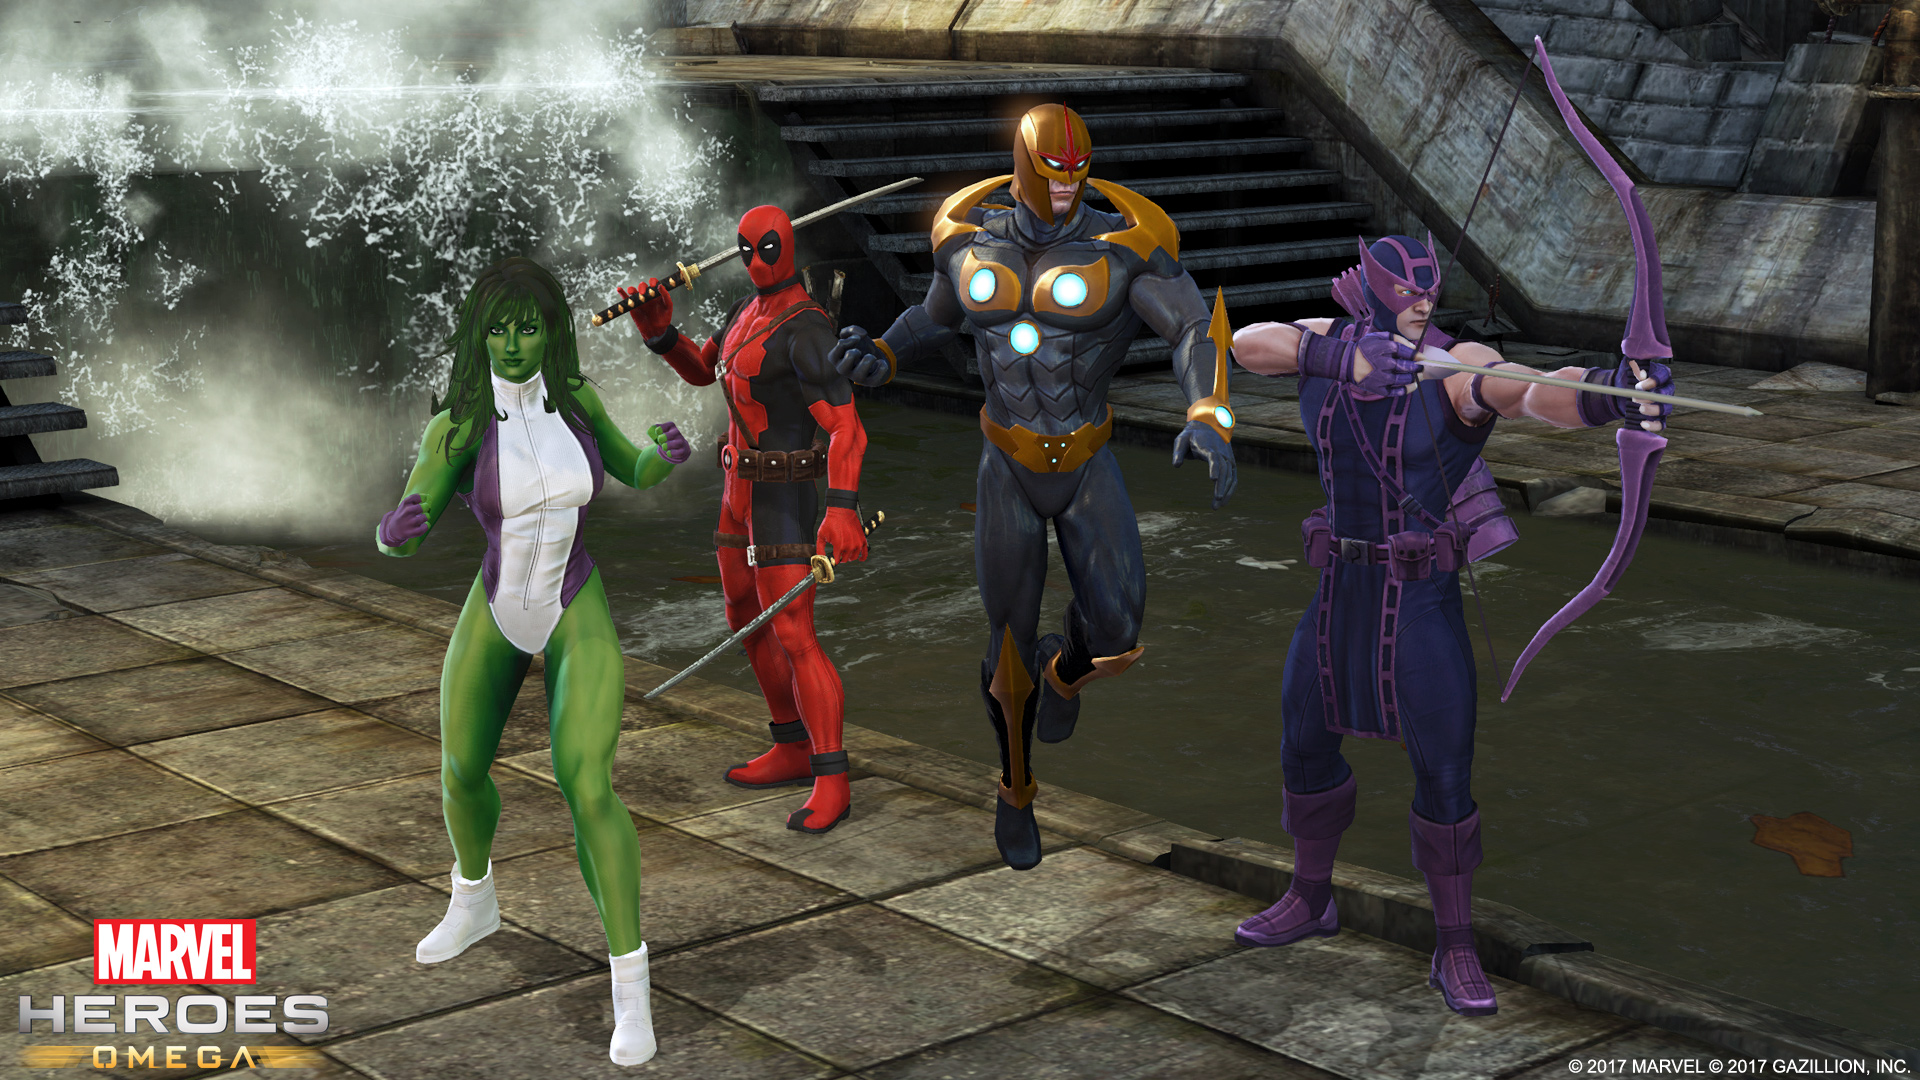 PSA: Prepare to dive into the house of ideas, Marvel Heroes Omega open beta  is live.